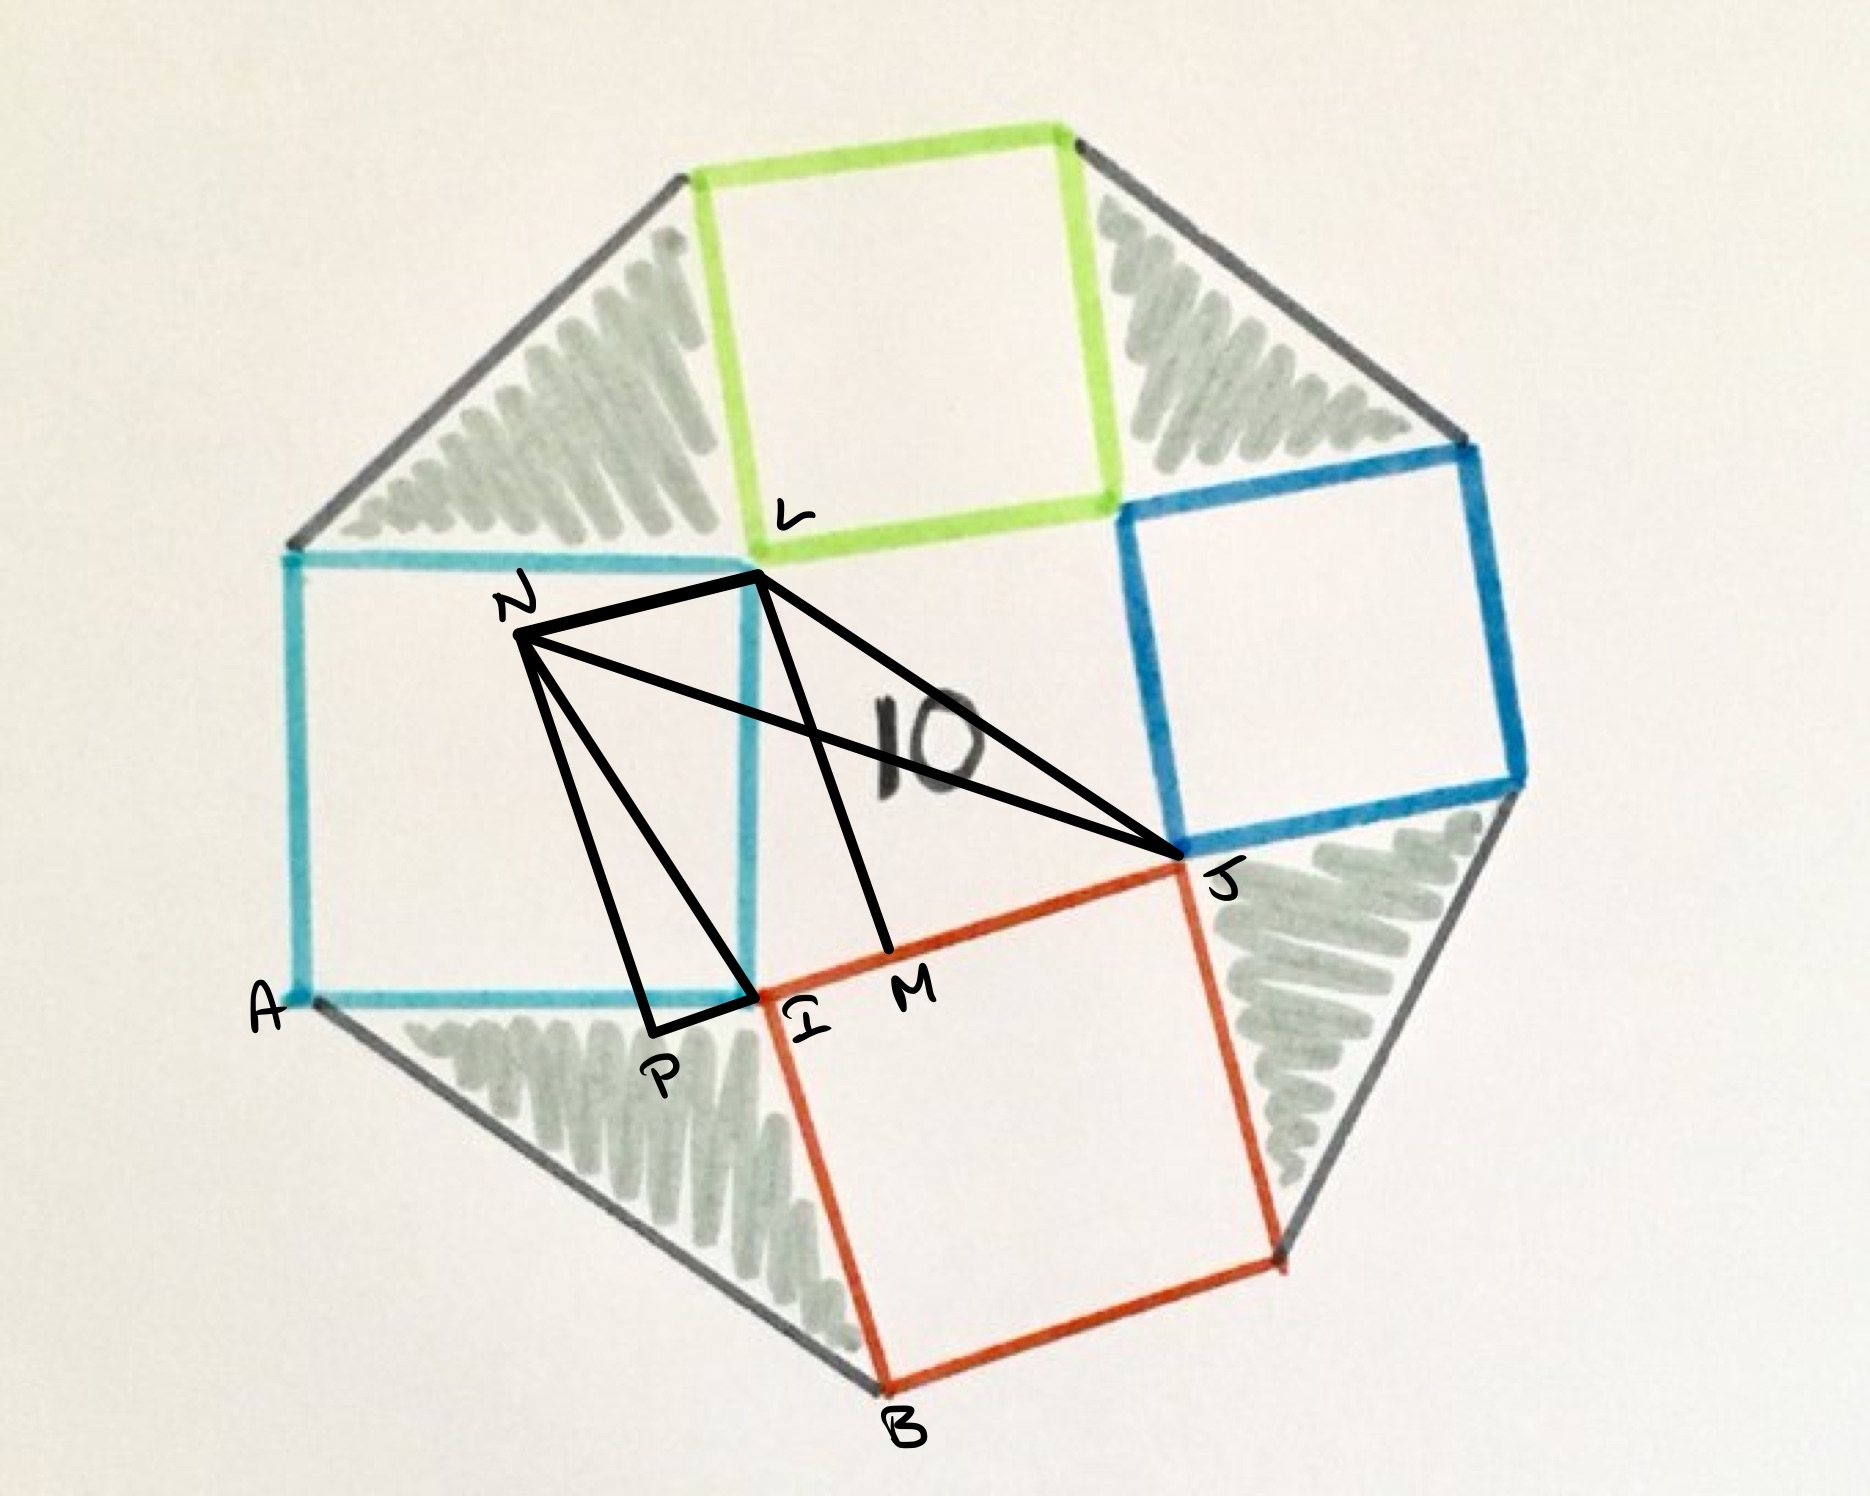 Four squares around a quadrilateral labelled